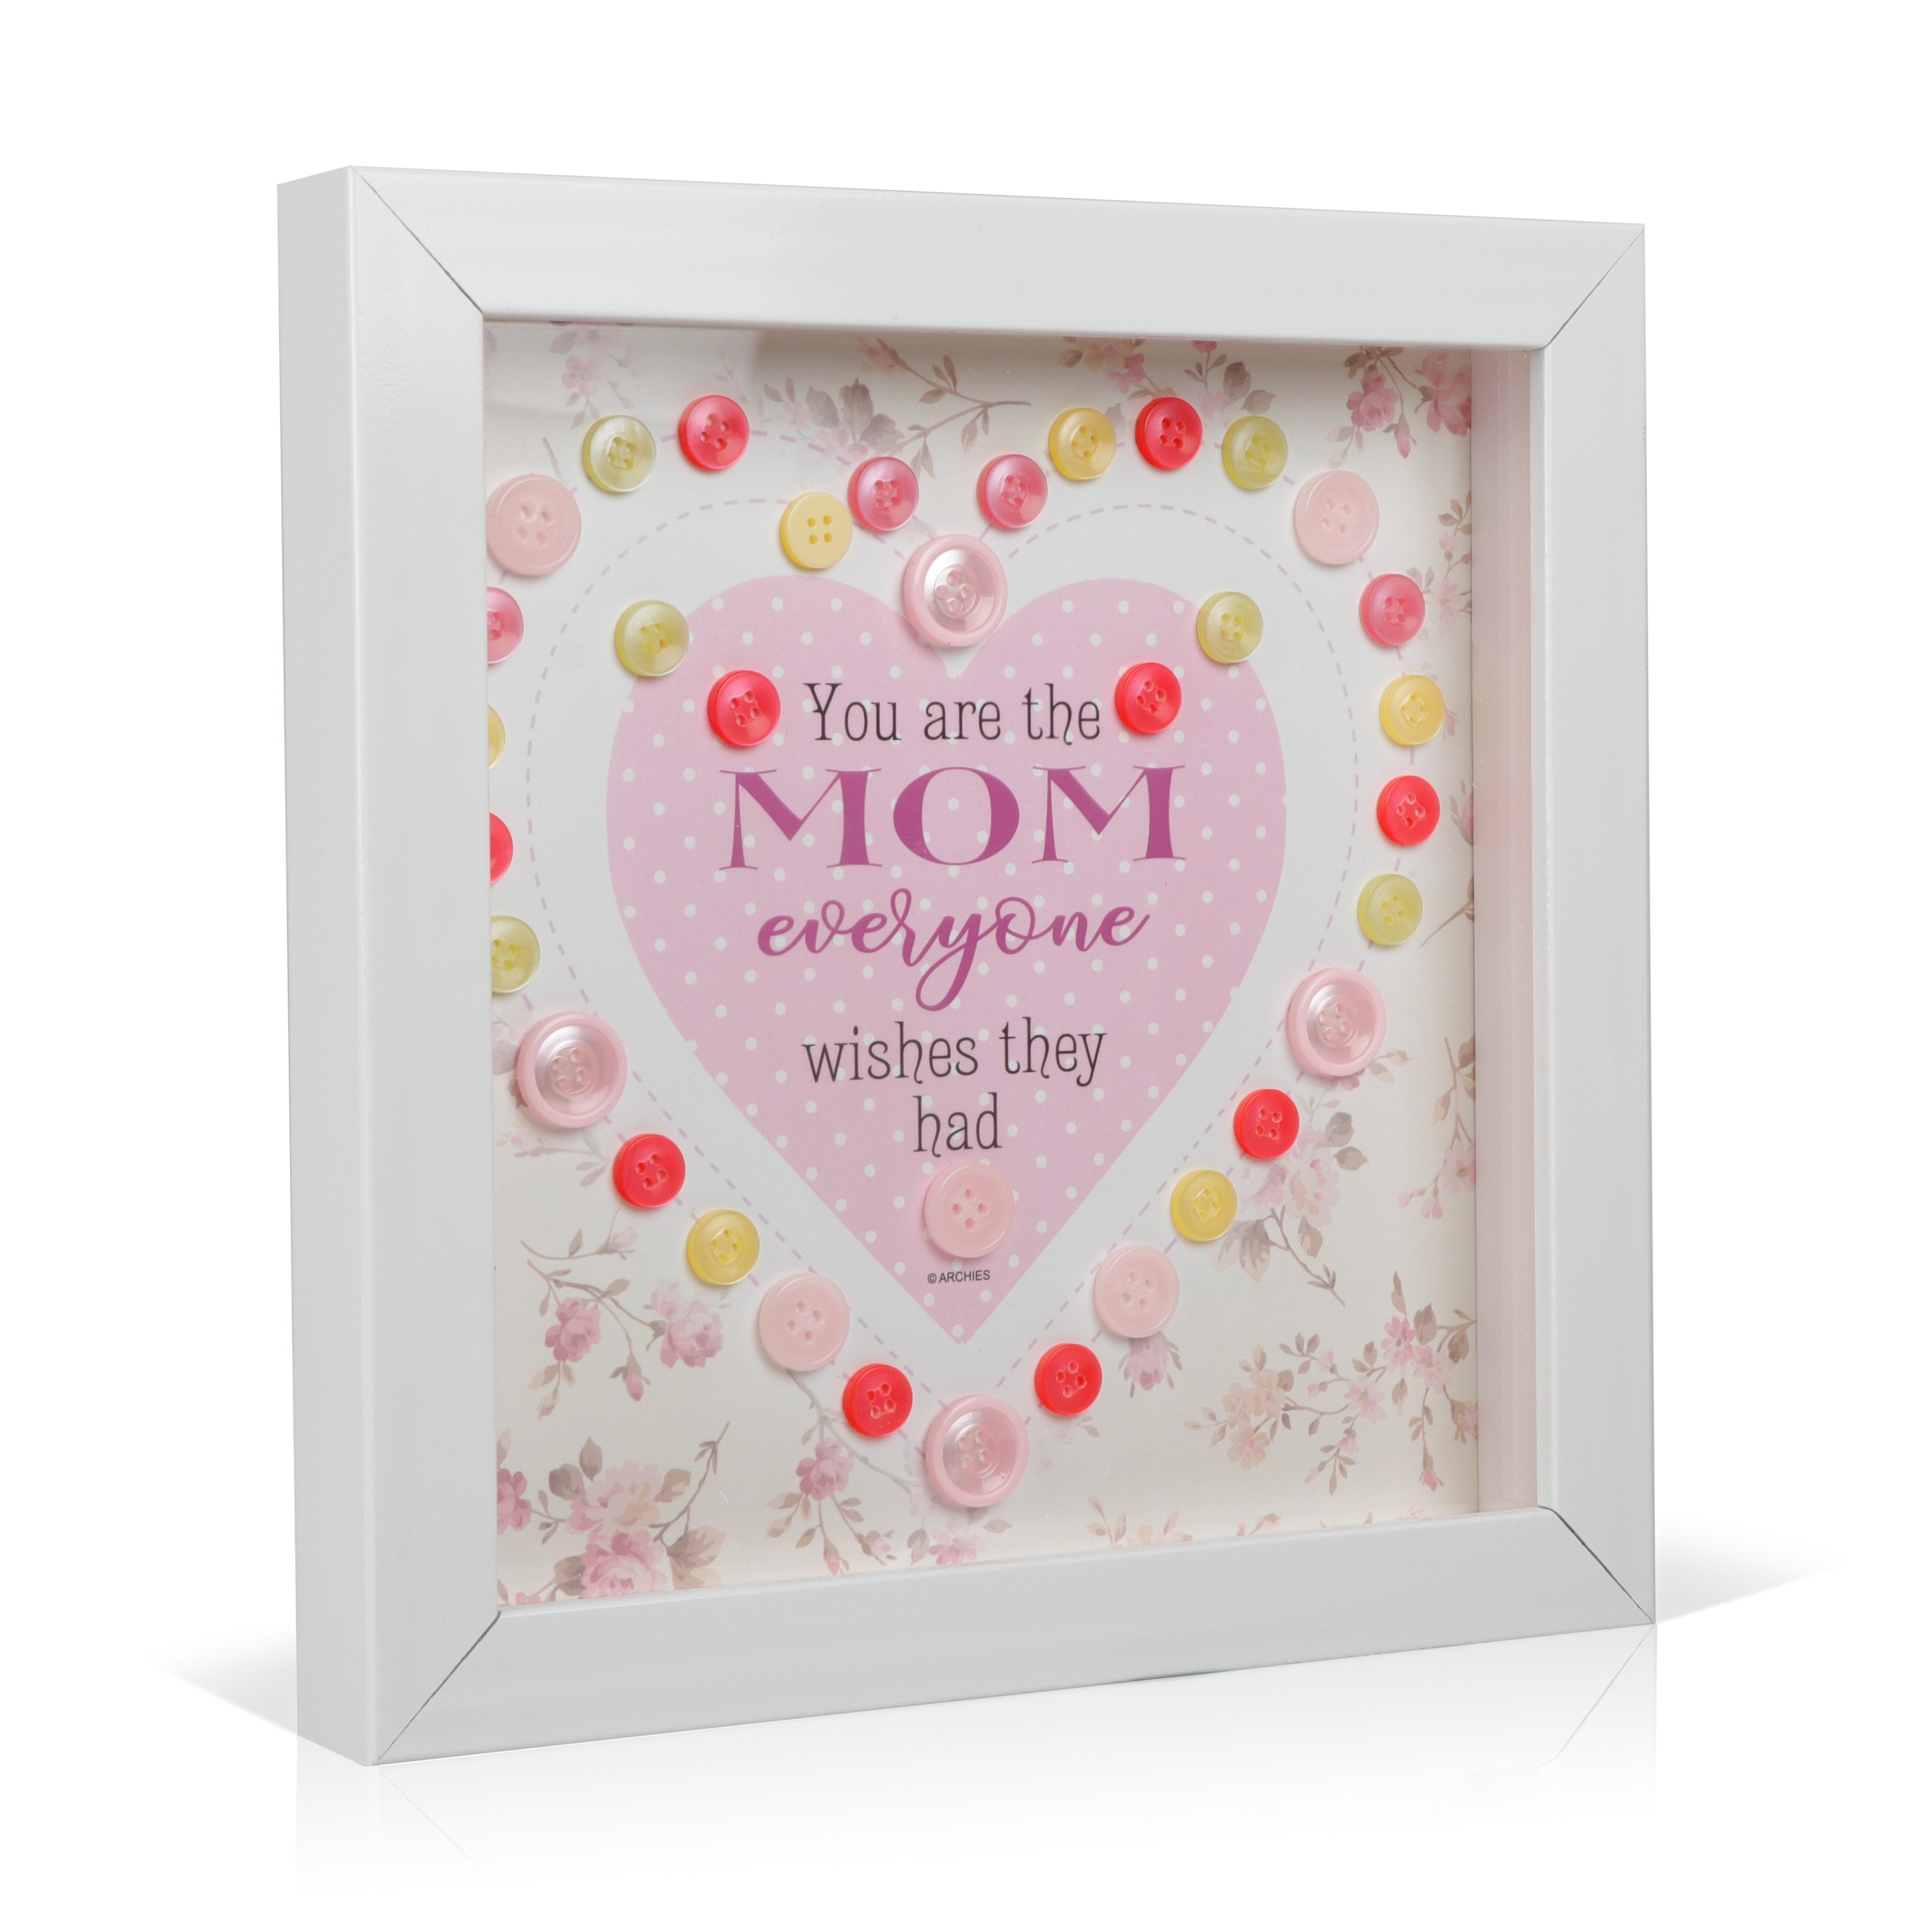 Archies | Archies KEEPSAKE BUTTON FRAME :YOU ARE THE MOM For gifting and Home décor 1